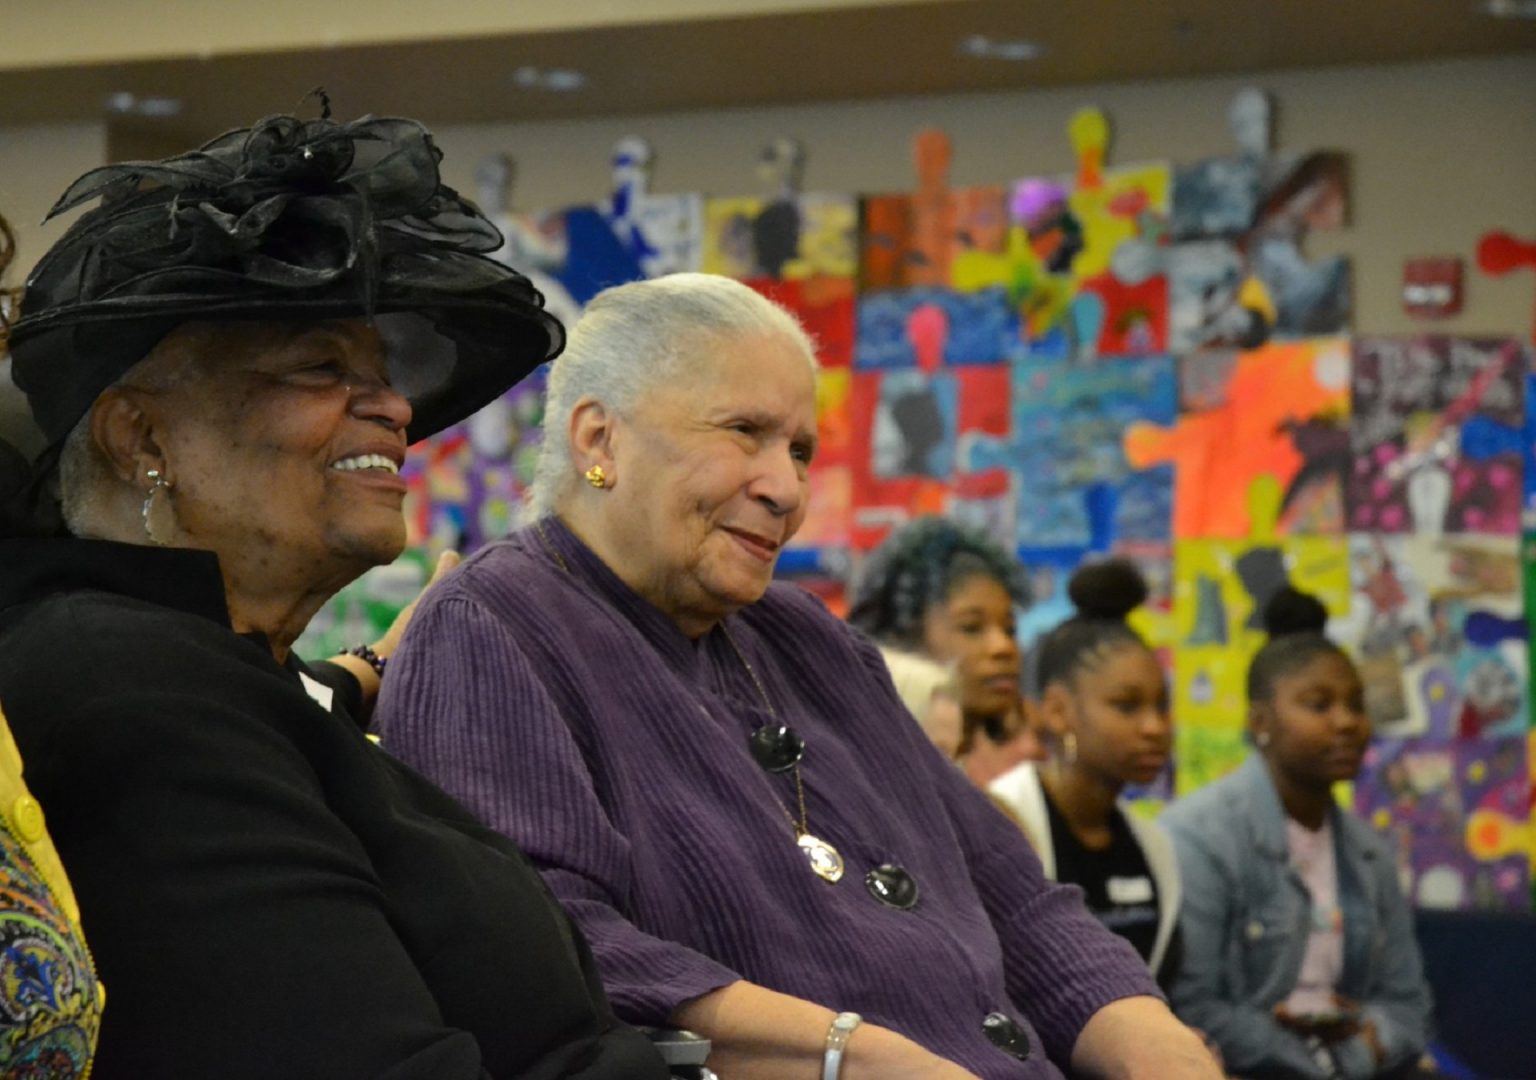 Bertha Garnett, center, listens to speakers at an event honoring her son, Reuben Garnett Jr., who was killed in action in Vietnam. At left is her daughter, India Garnett, who worked for decades to have her brother's service honored. Bertha's great-granddaughters Courtney, Tianna and Sheniah can be seen in the background.